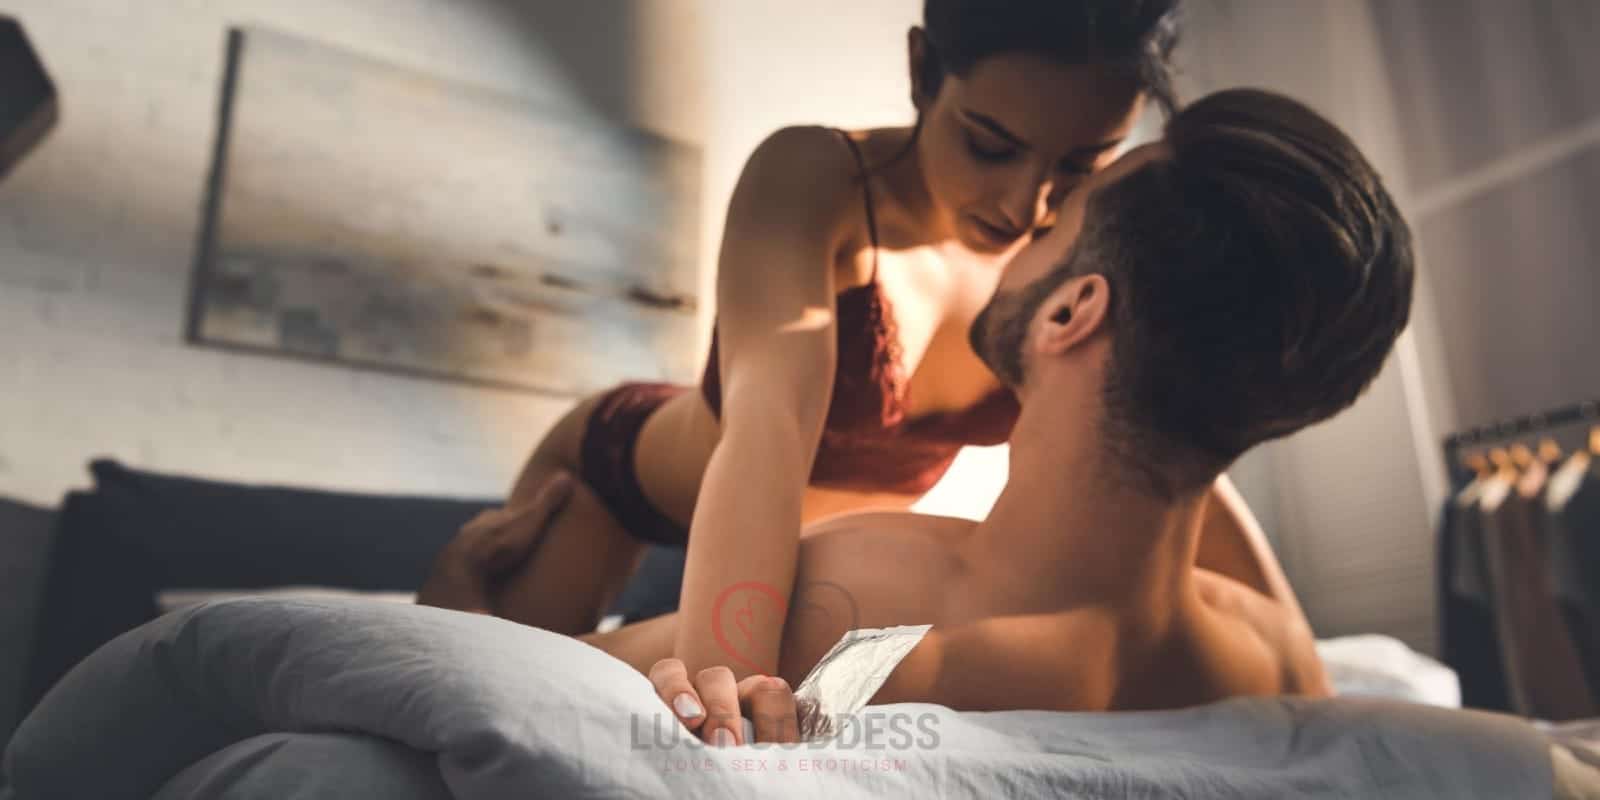 10 Kamasutra Sex Positions for Different Ages and Stages of Life